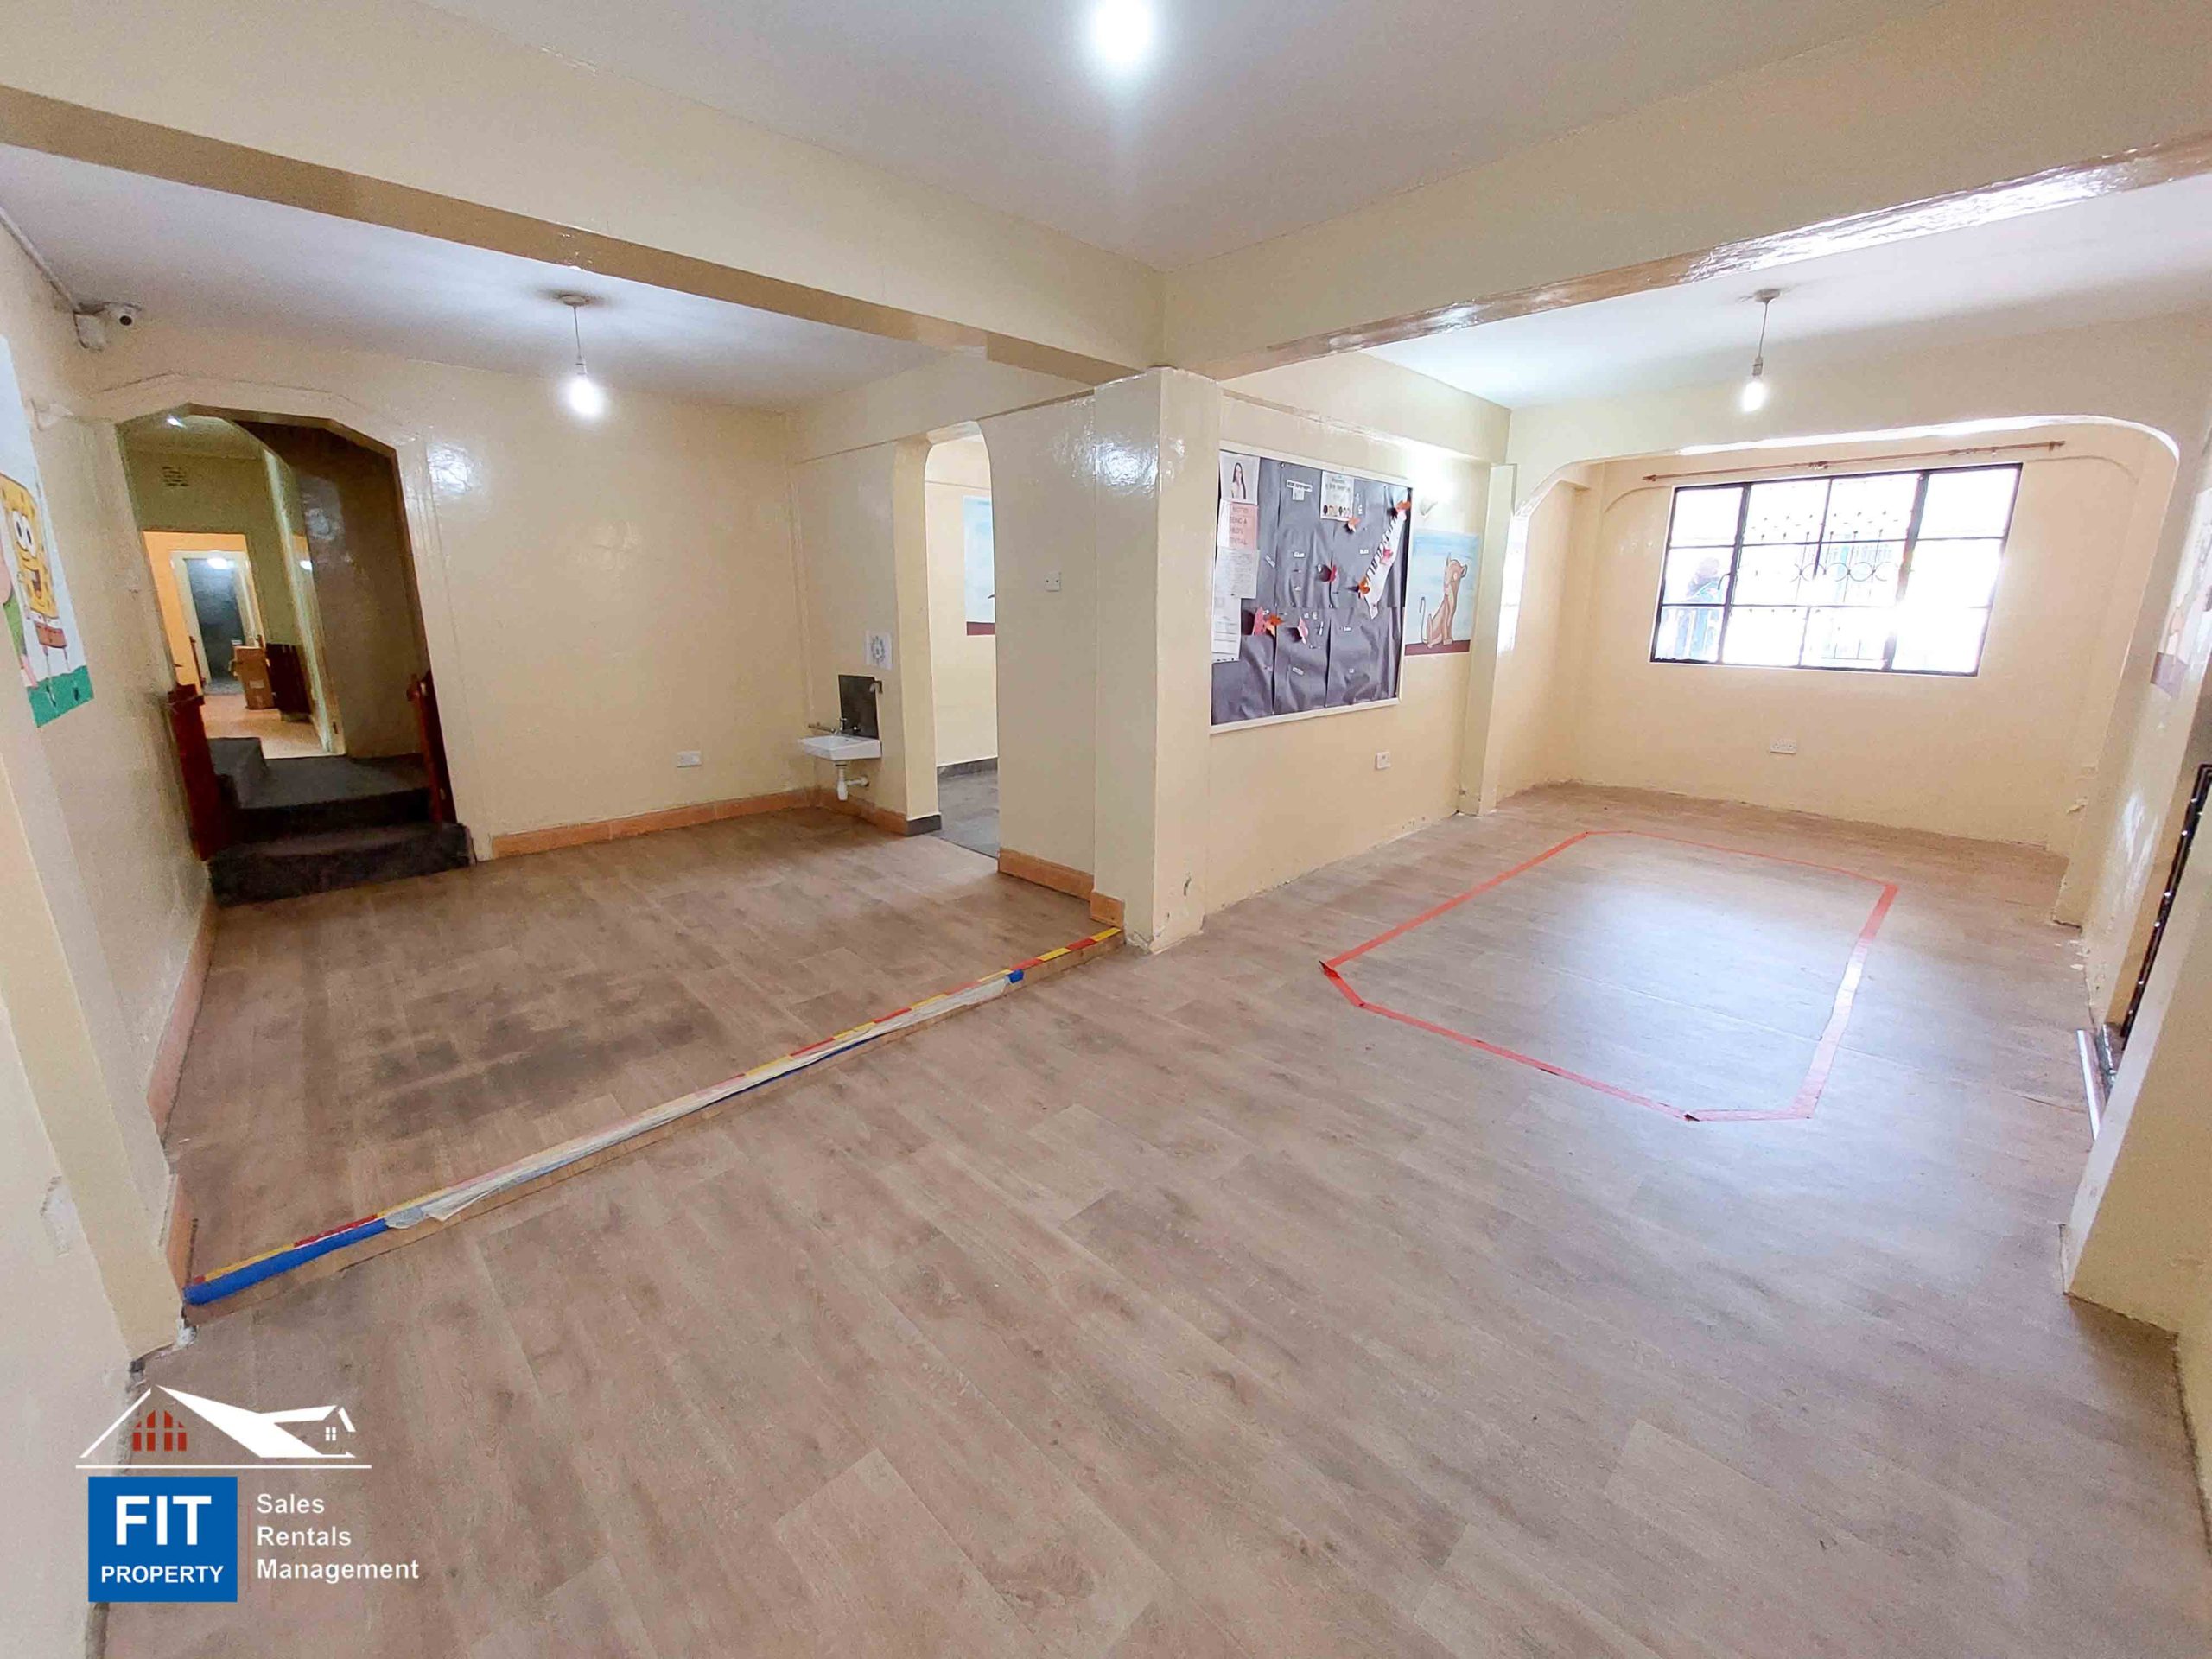 Fully Equipped Montessori School for Sale in the Heart of Gigiri, Nairobi! Near the UN, American Embassy, and various NGOs. Price 150M FIT Property